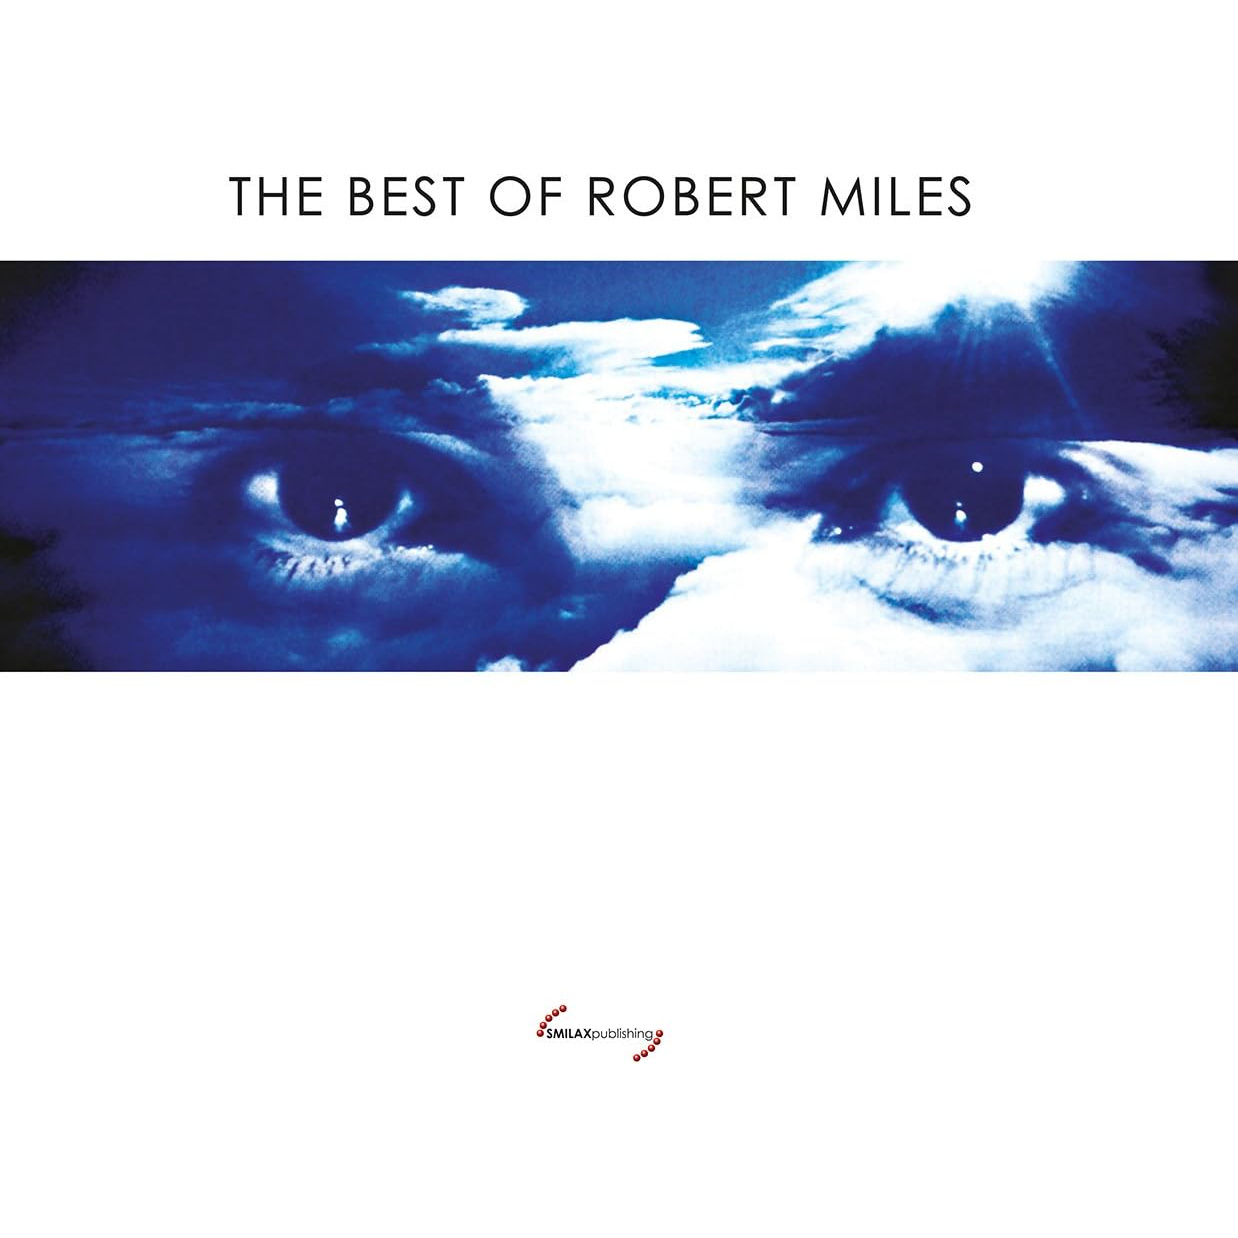 THE BEST OF ROBERT MILES - LIMITED EDITION 500 BLACK VINYL